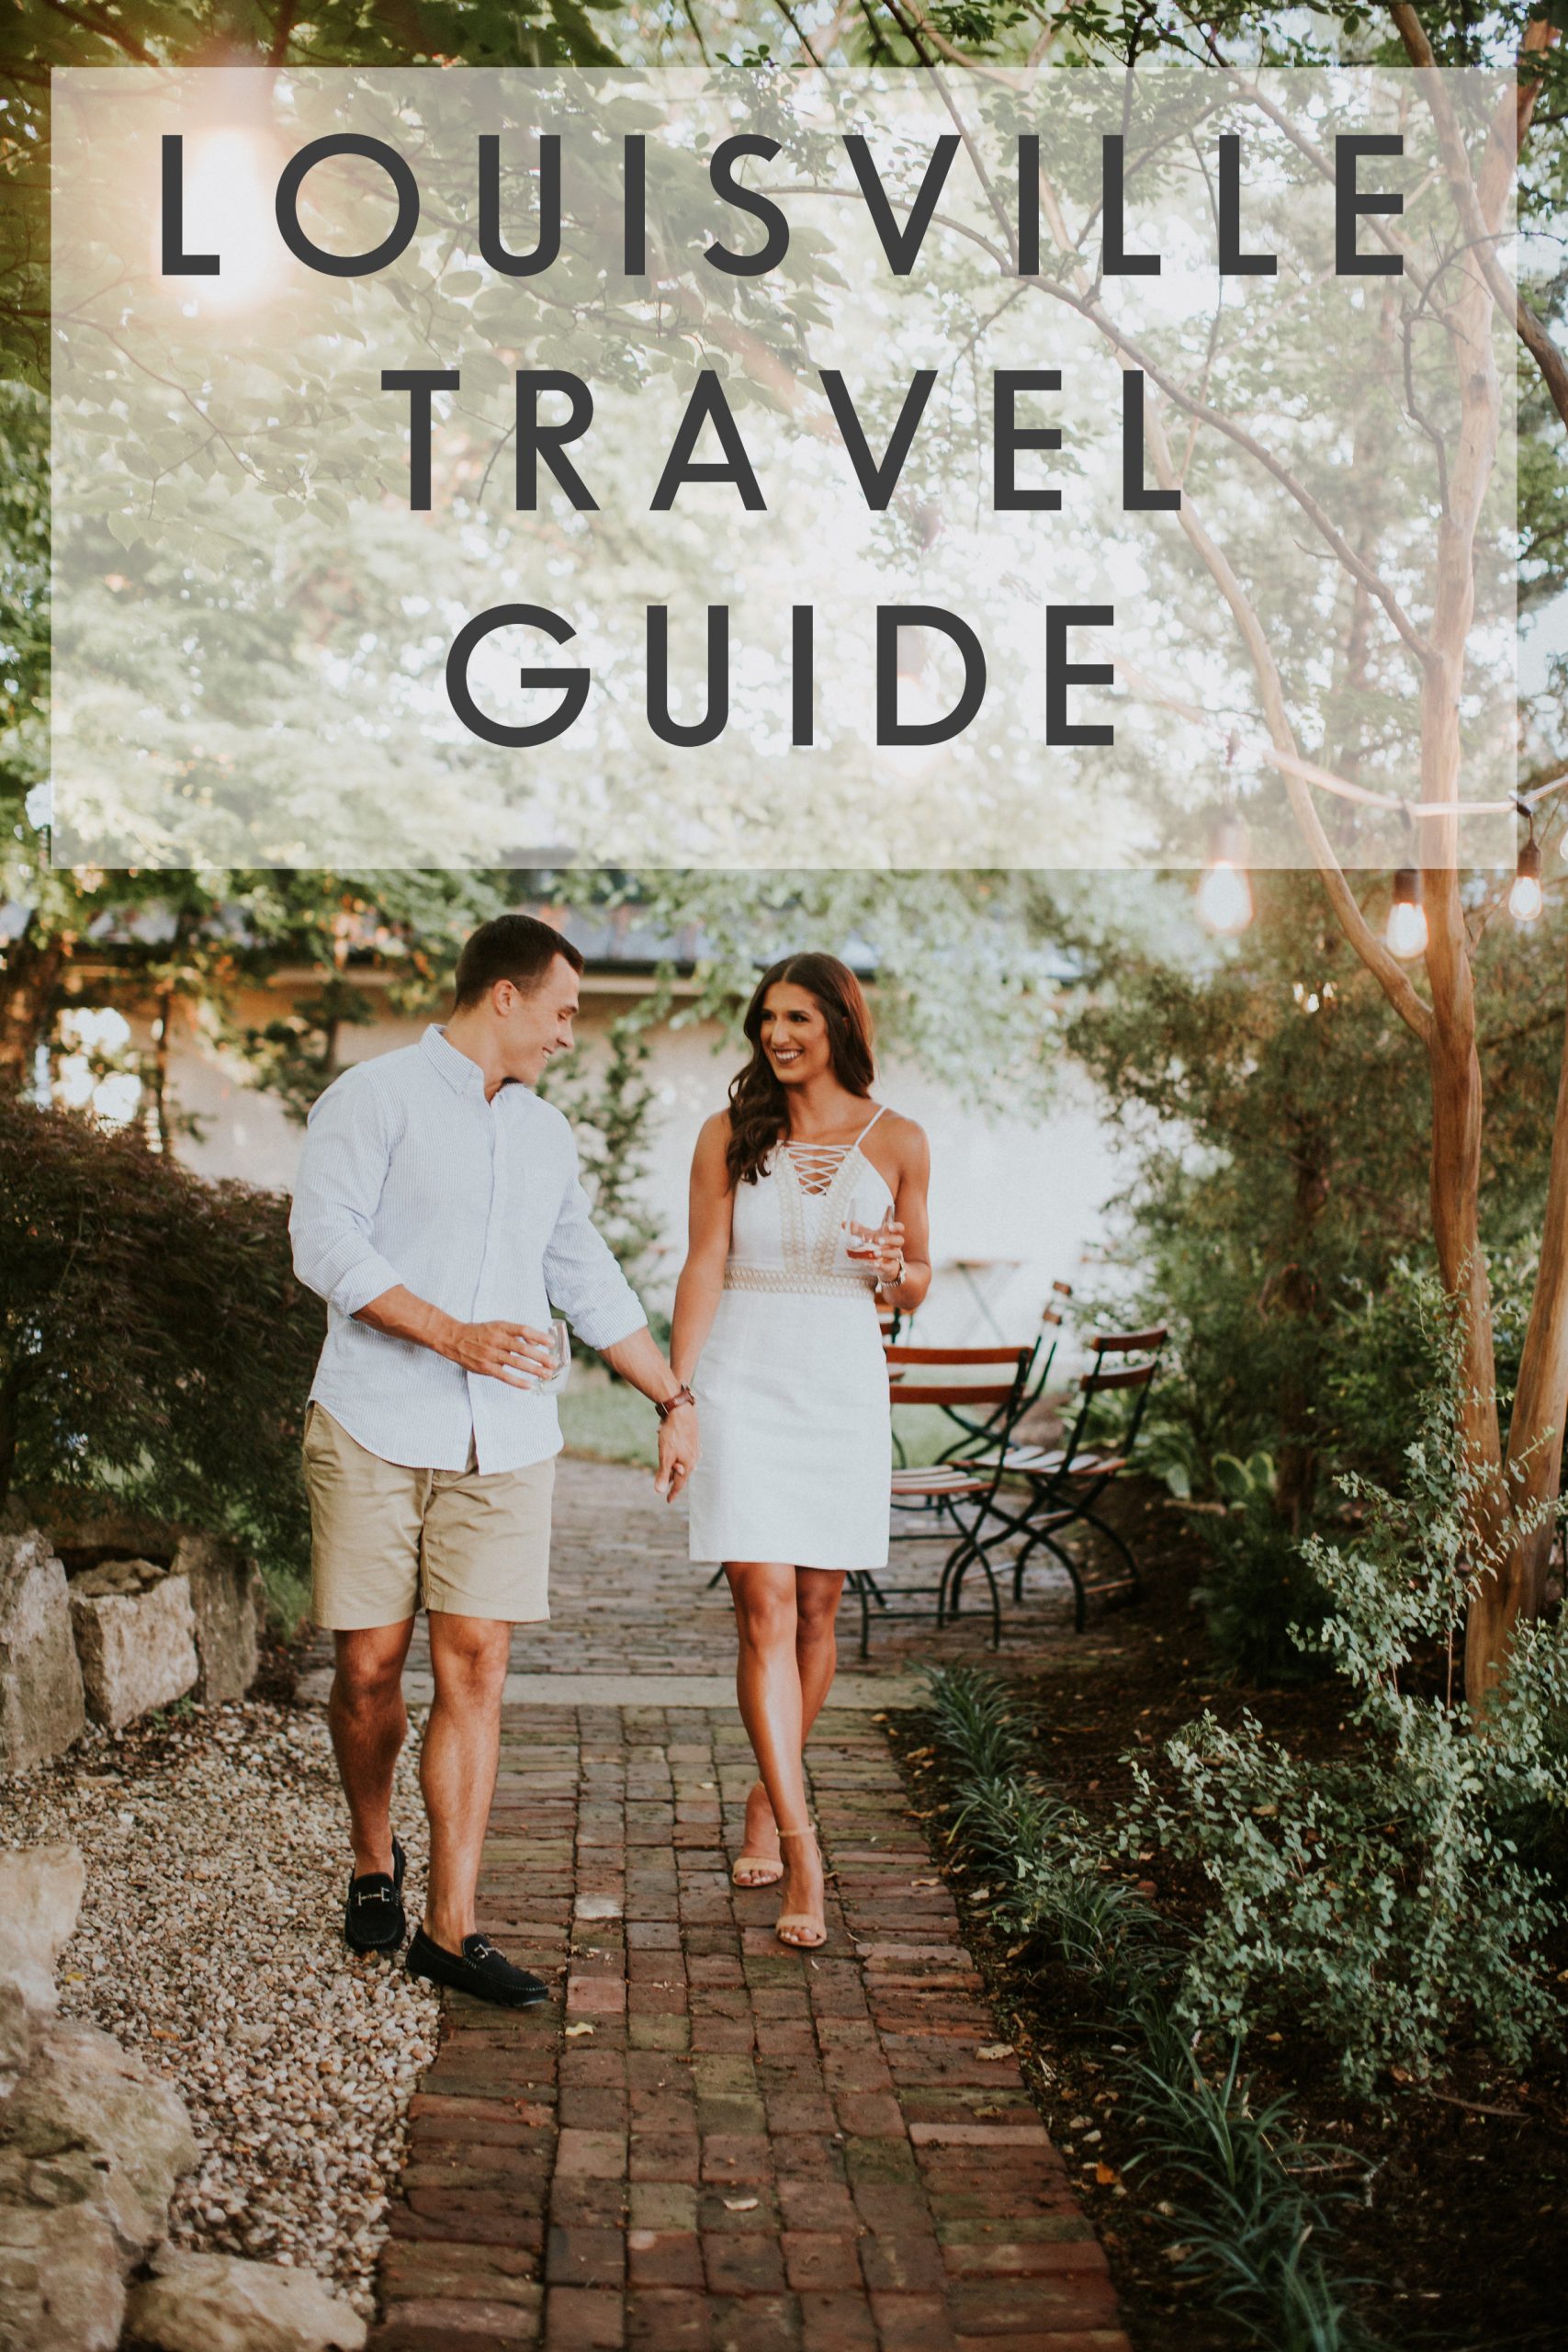 louisville travel guide, where to stay in louisville, ky, where to eat in louisville ky, louisville kentucky guide, best louisville hotels, best louisville restaurants, kentucky derby guide, derby style guide, derby city guide, louisville tour, best louisville restaurants, best louisville bars // grace white a southern drawl